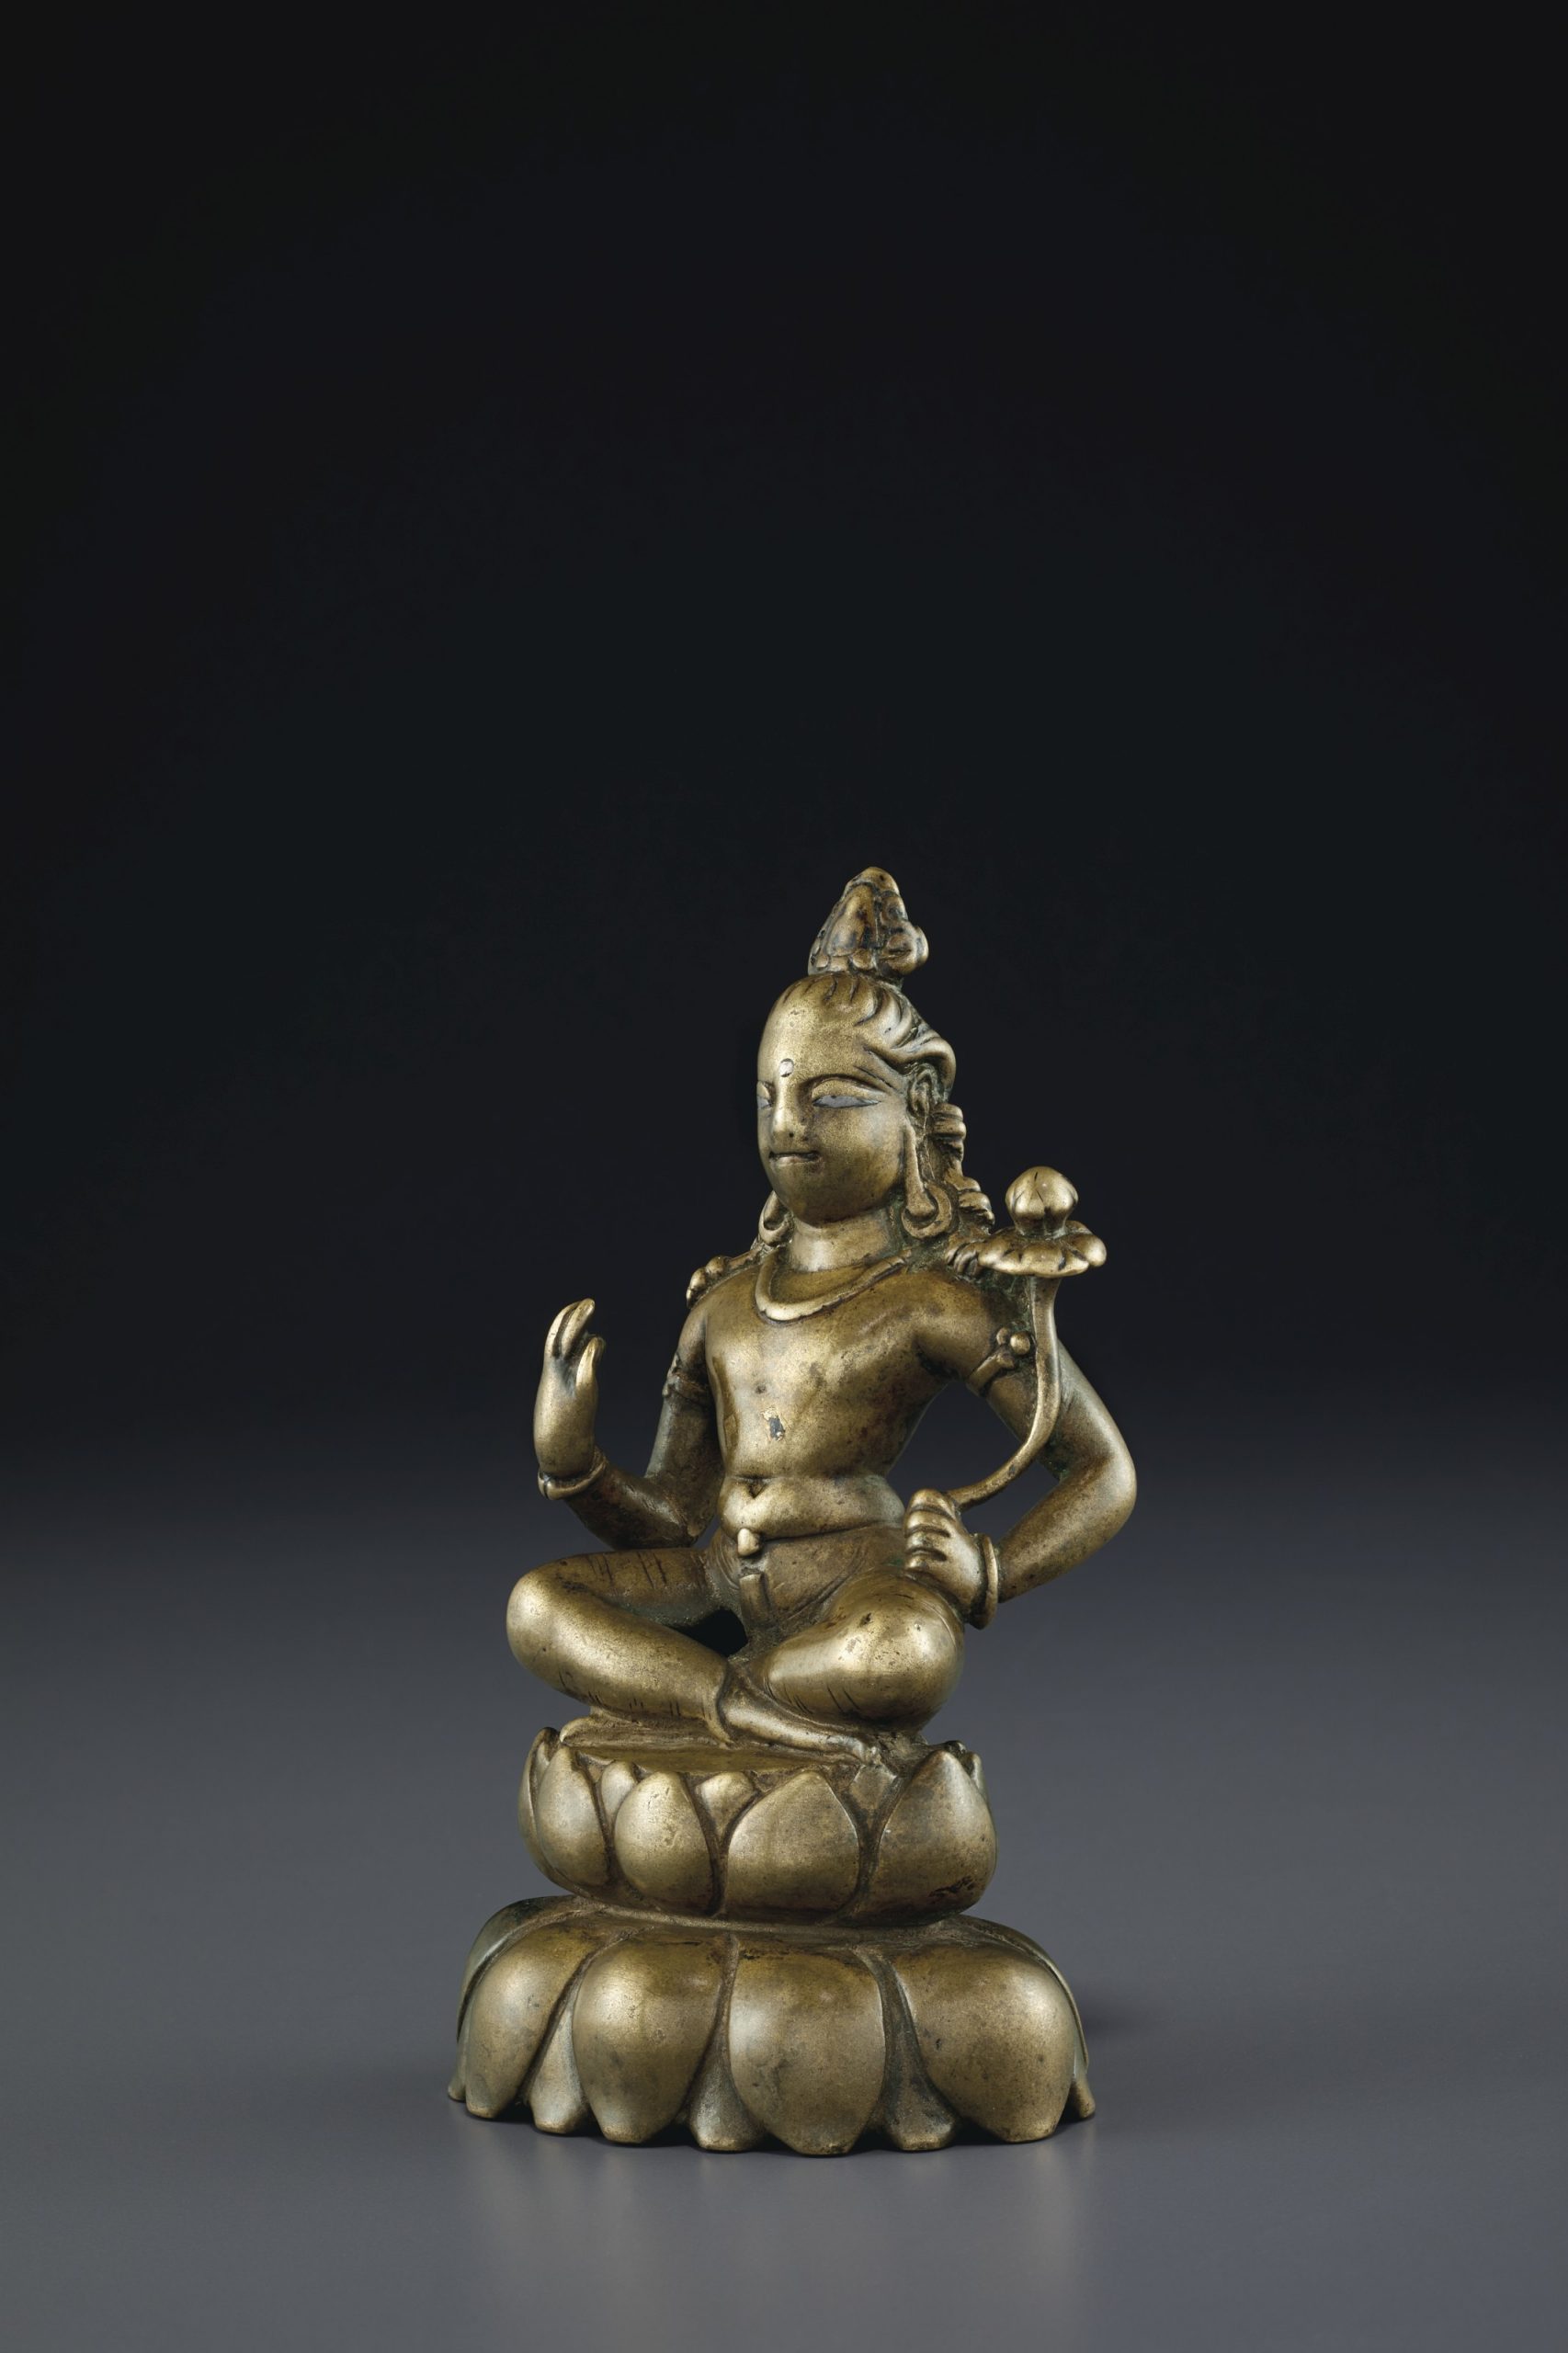 A COPPER- AND SILVER-INLAID BRONZE FIGURE OF PADMAPANI LOKESHVARA SWAT VALLEY, 8TH-9TH CENTURY 